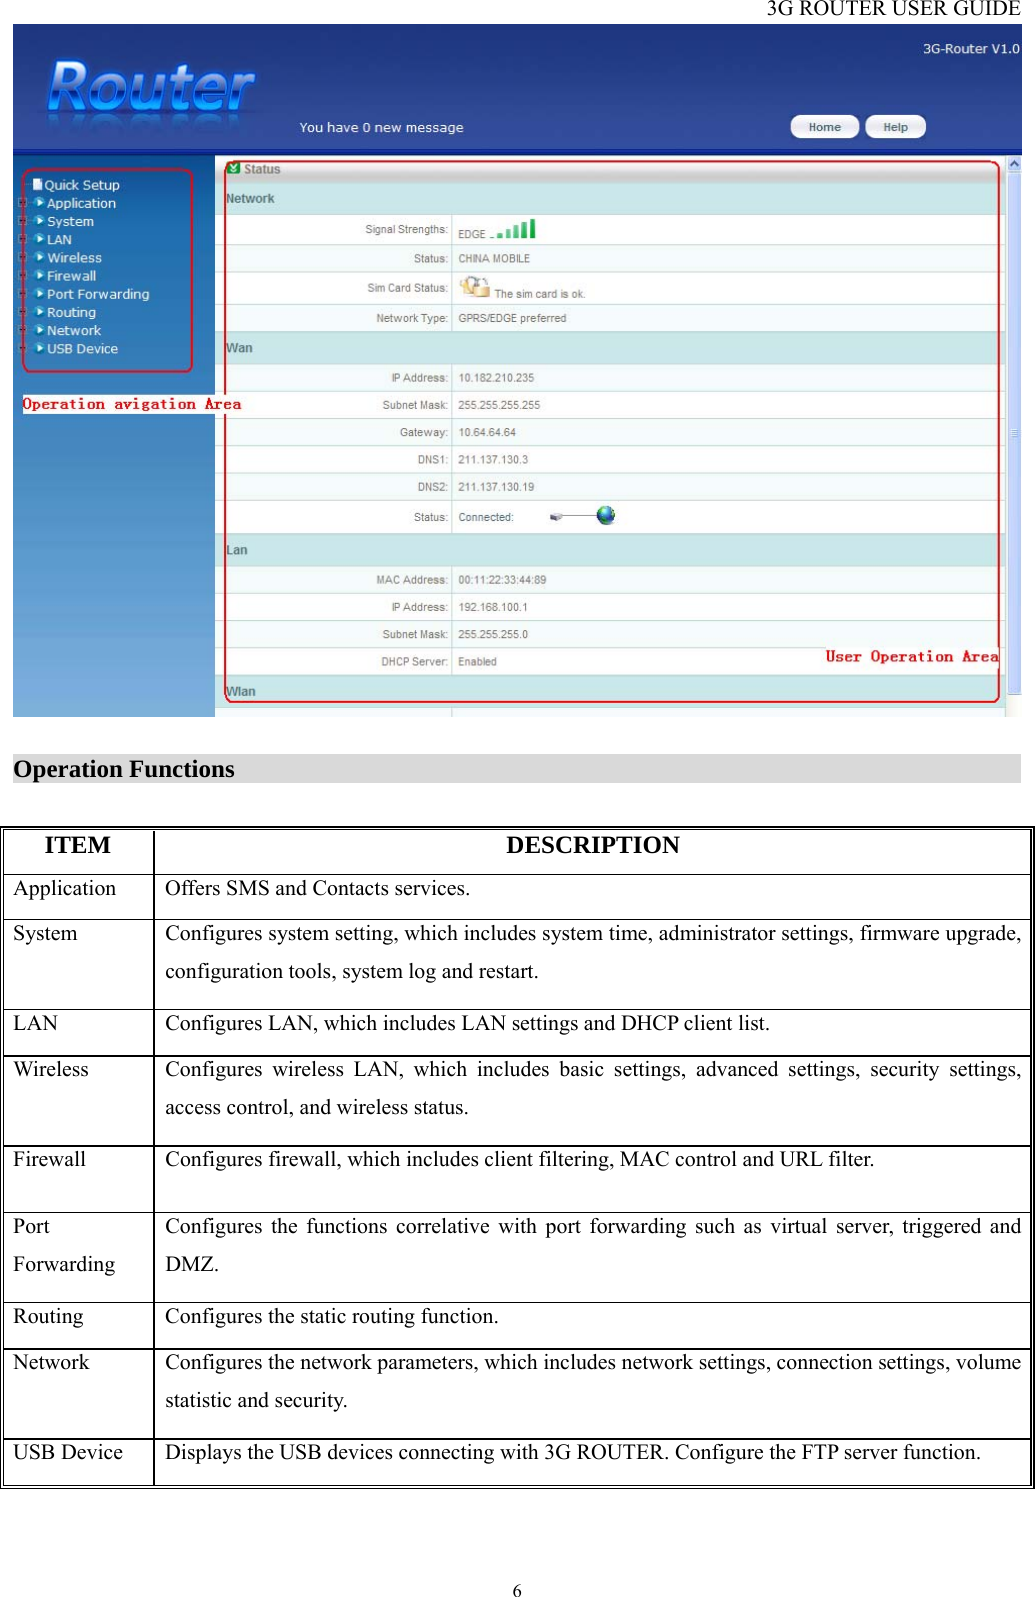 3G ROUTER USER GUIDE  6  Operation Functions                                                                   ITEM DESCRIPTION Application  Offers SMS and Contacts services. System  Configures system setting, which includes system time, administrator settings, firmware upgrade, configuration tools, system log and restart. LAN  Configures LAN, which includes LAN settings and DHCP client list. Wireless  Configures wireless LAN, which includes basic settings, advanced settings, security settings, access control, and wireless status. Firewall  Configures firewall, which includes client filtering, MAC control and URL filter. Port Forwarding Configures the functions correlative with port forwarding such as virtual server, triggered and DMZ. Routing  Configures the static routing function. Network  Configures the network parameters, which includes network settings, connection settings, volume statistic and security. USB Device  Displays the USB devices connecting with 3G ROUTER. Configure the FTP server function.   